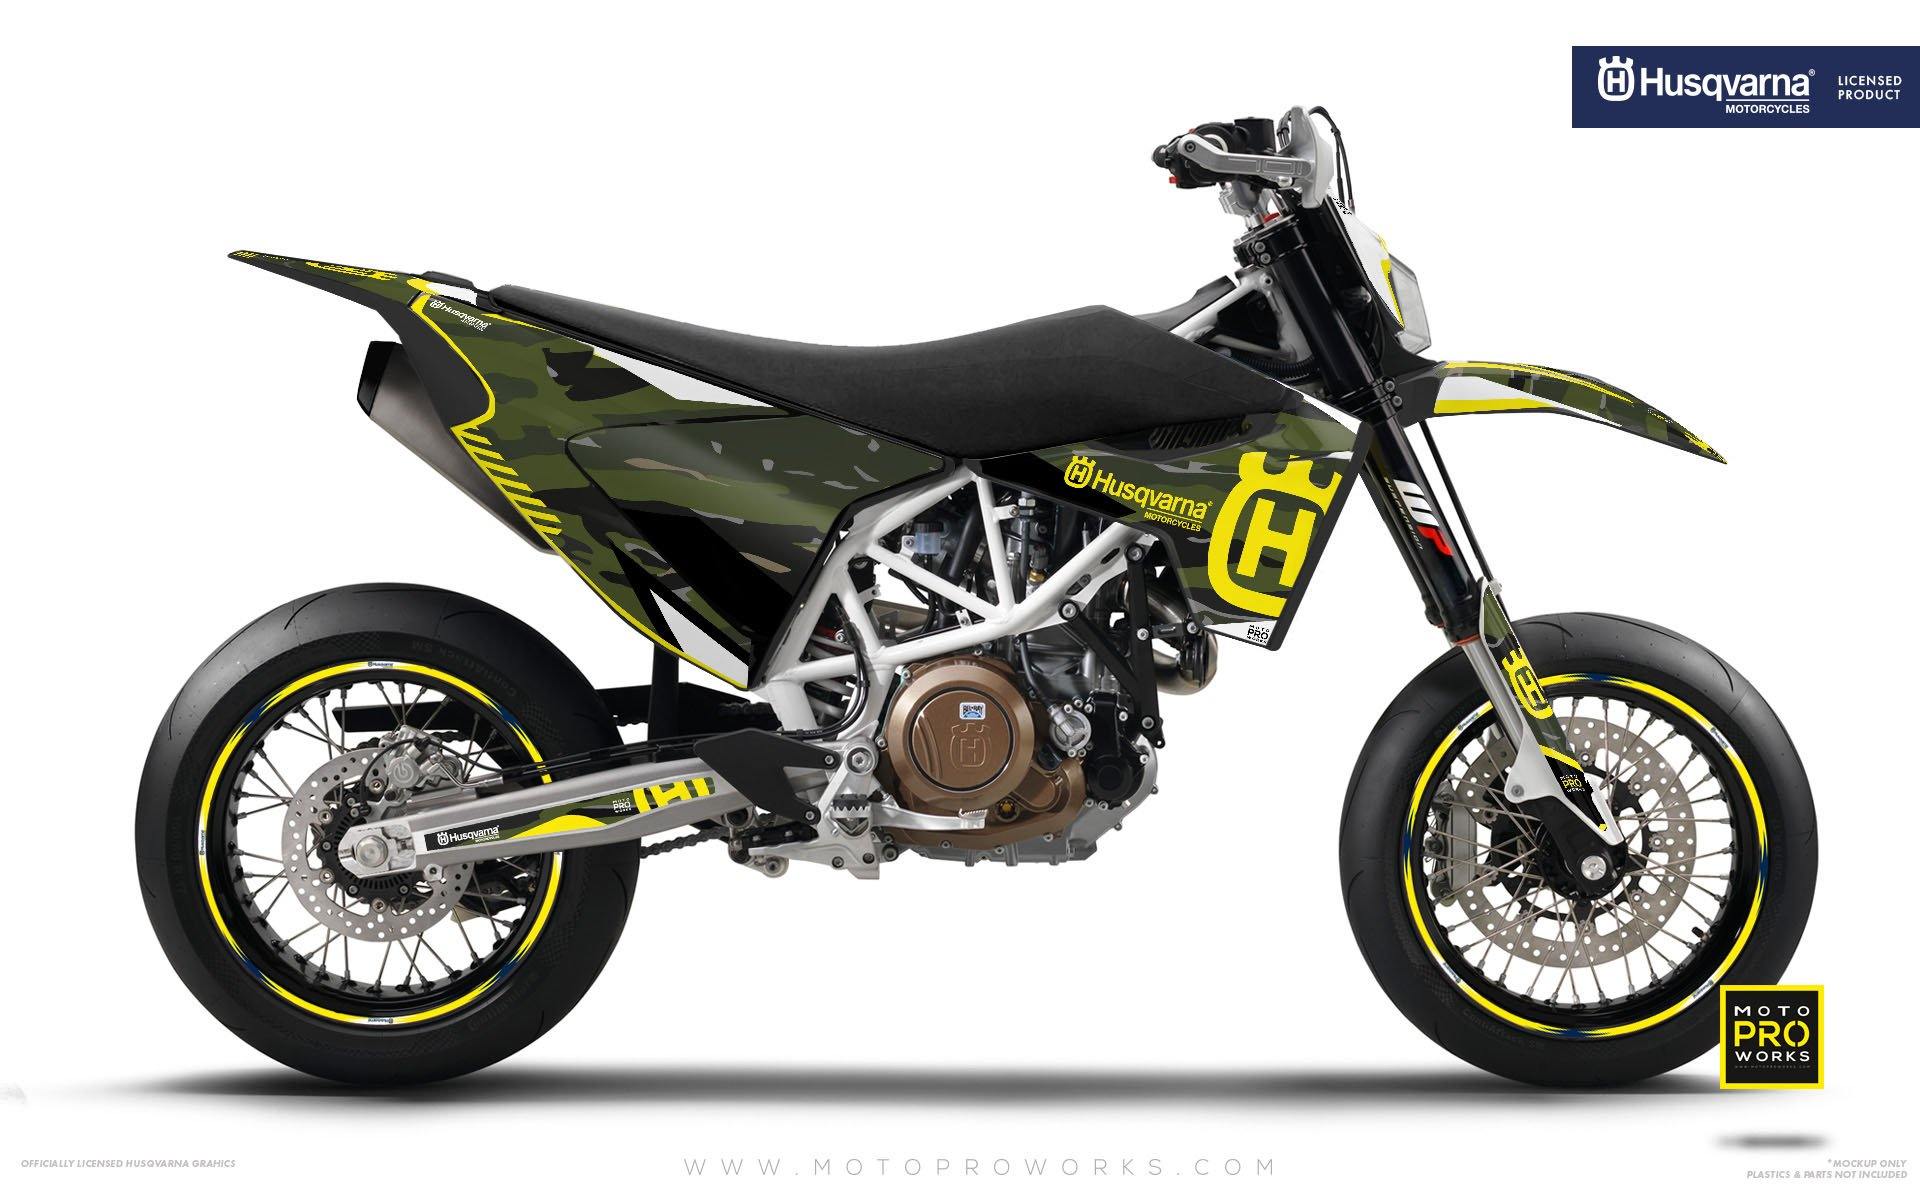 Husqvarna GRAPHIC KIT - "FACTOR" (Tigercamo/nordic) - MotoProWorks | Decals and Bike Graphic kit